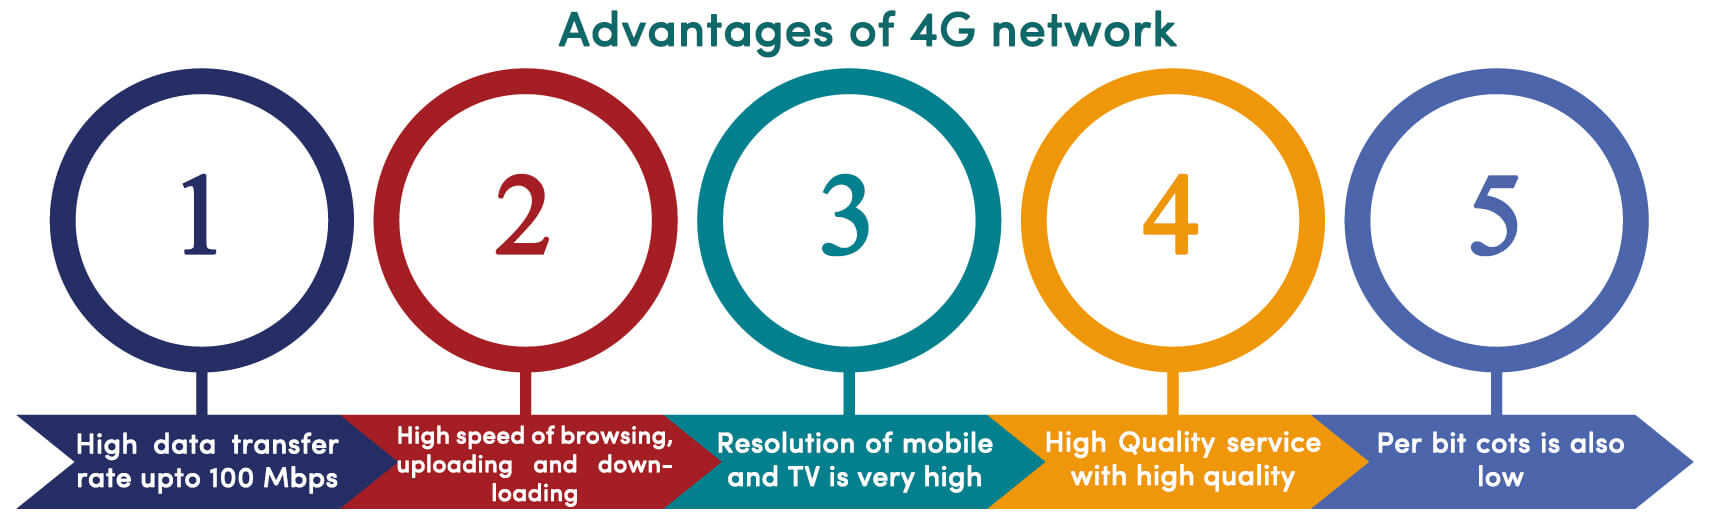 Advantages of 4G network